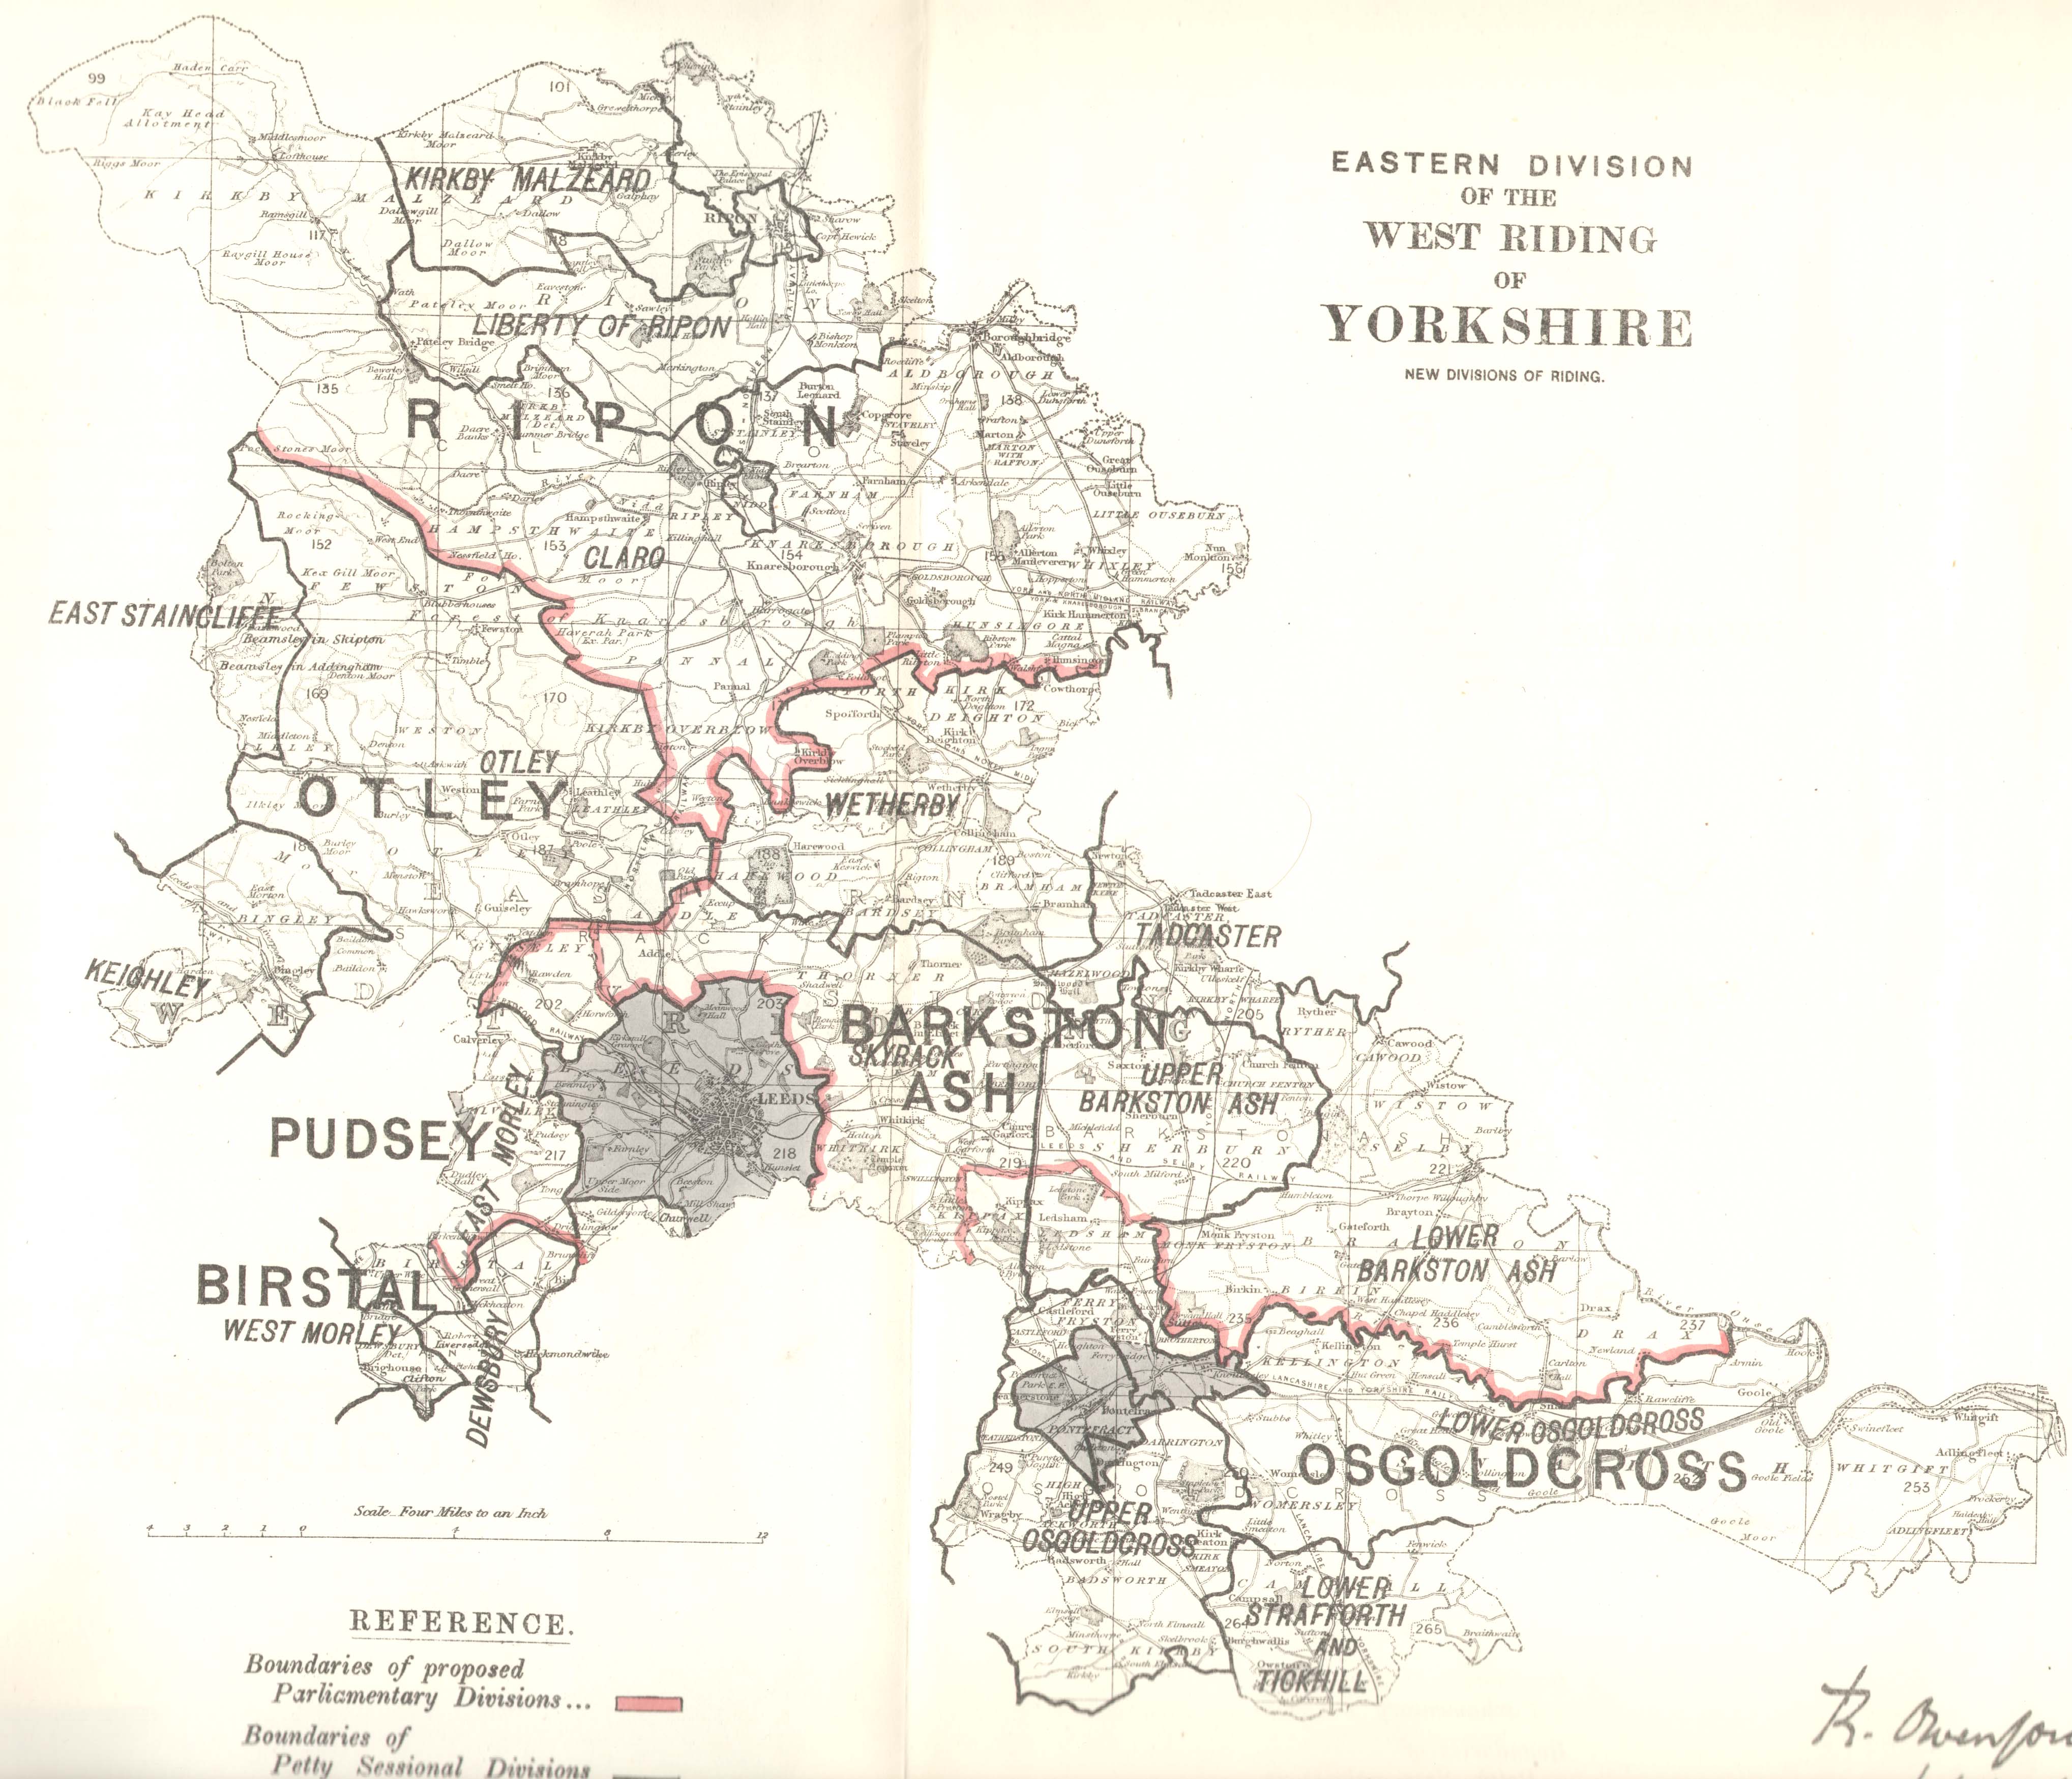 Map of the West Riding, Eastern Division